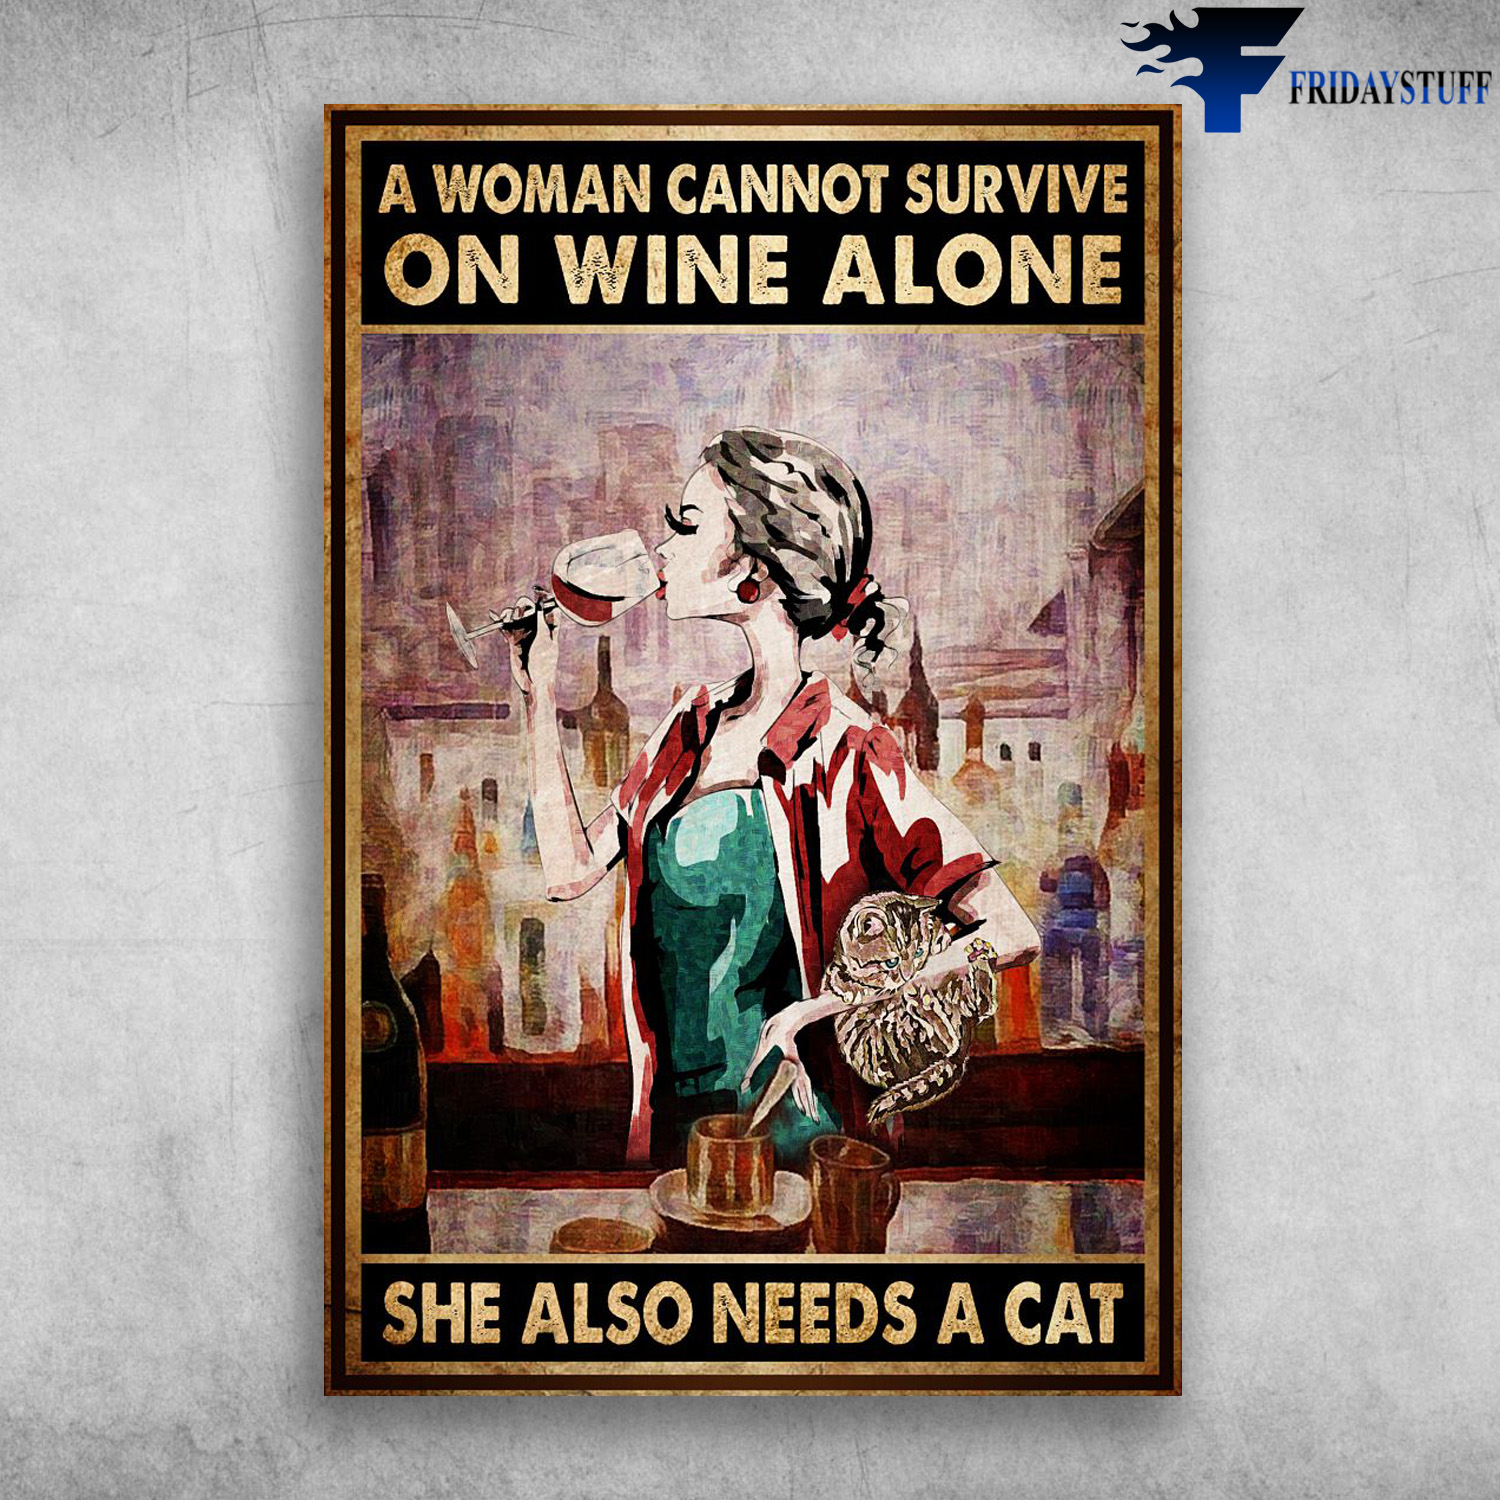 Girl Loves Cat And Wine - A Woman Cannot Survive On Wine Alone, She Also Needs A Cat